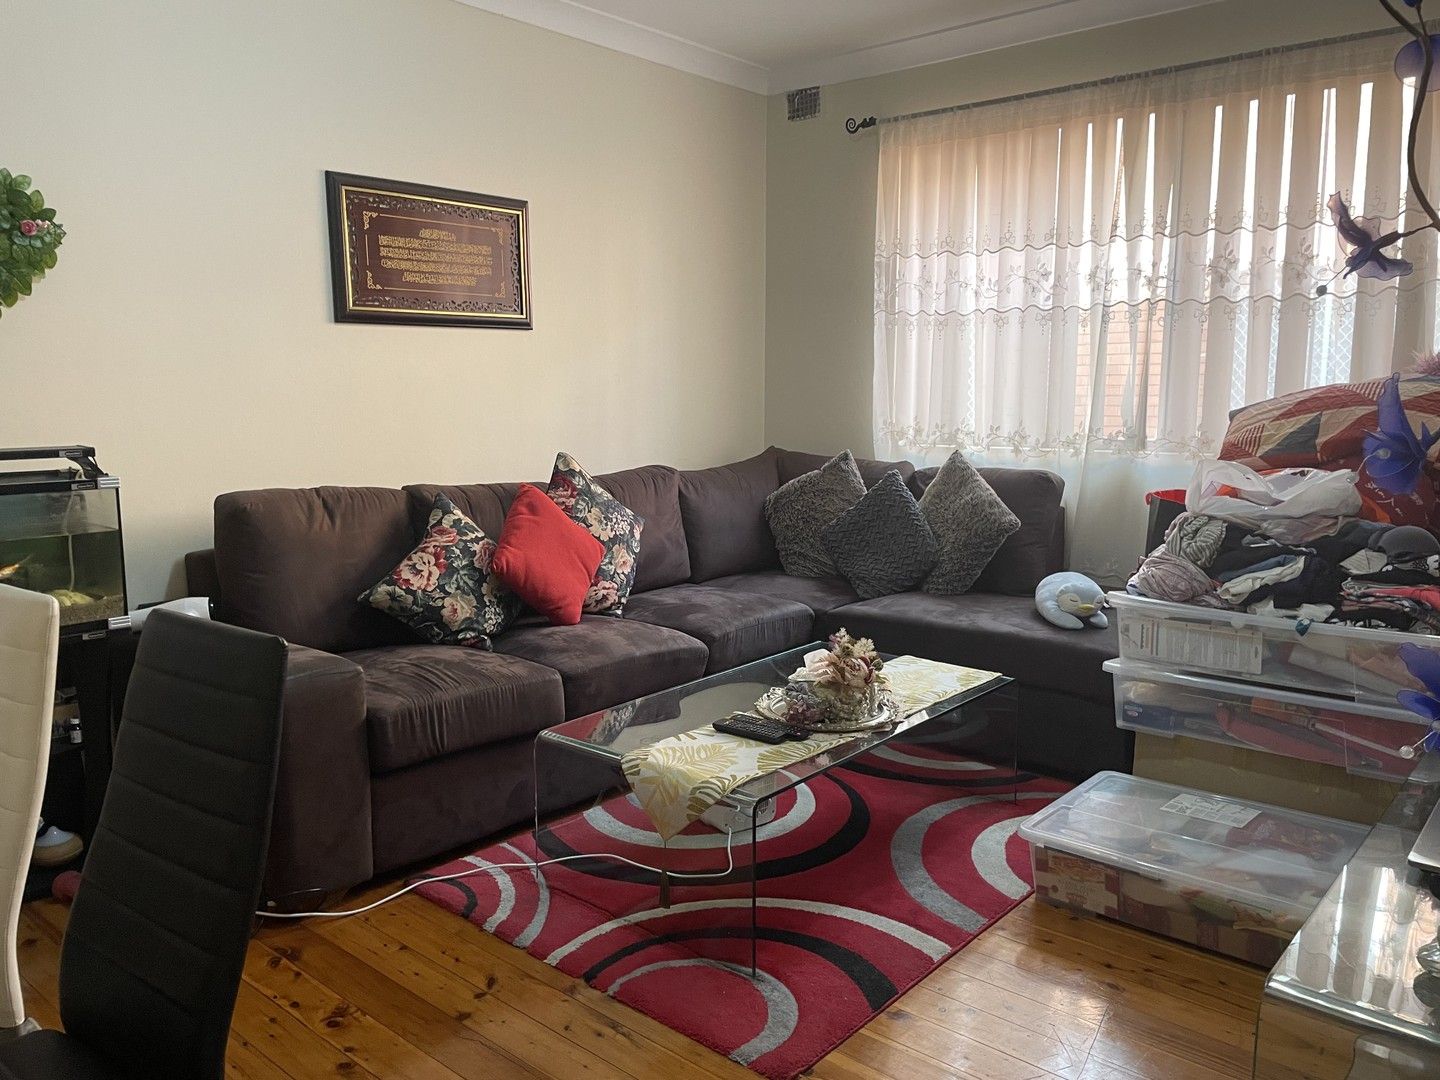 2 bedrooms Apartment / Unit / Flat in 3/20 Colin Street LAKEMBA NSW, 2195